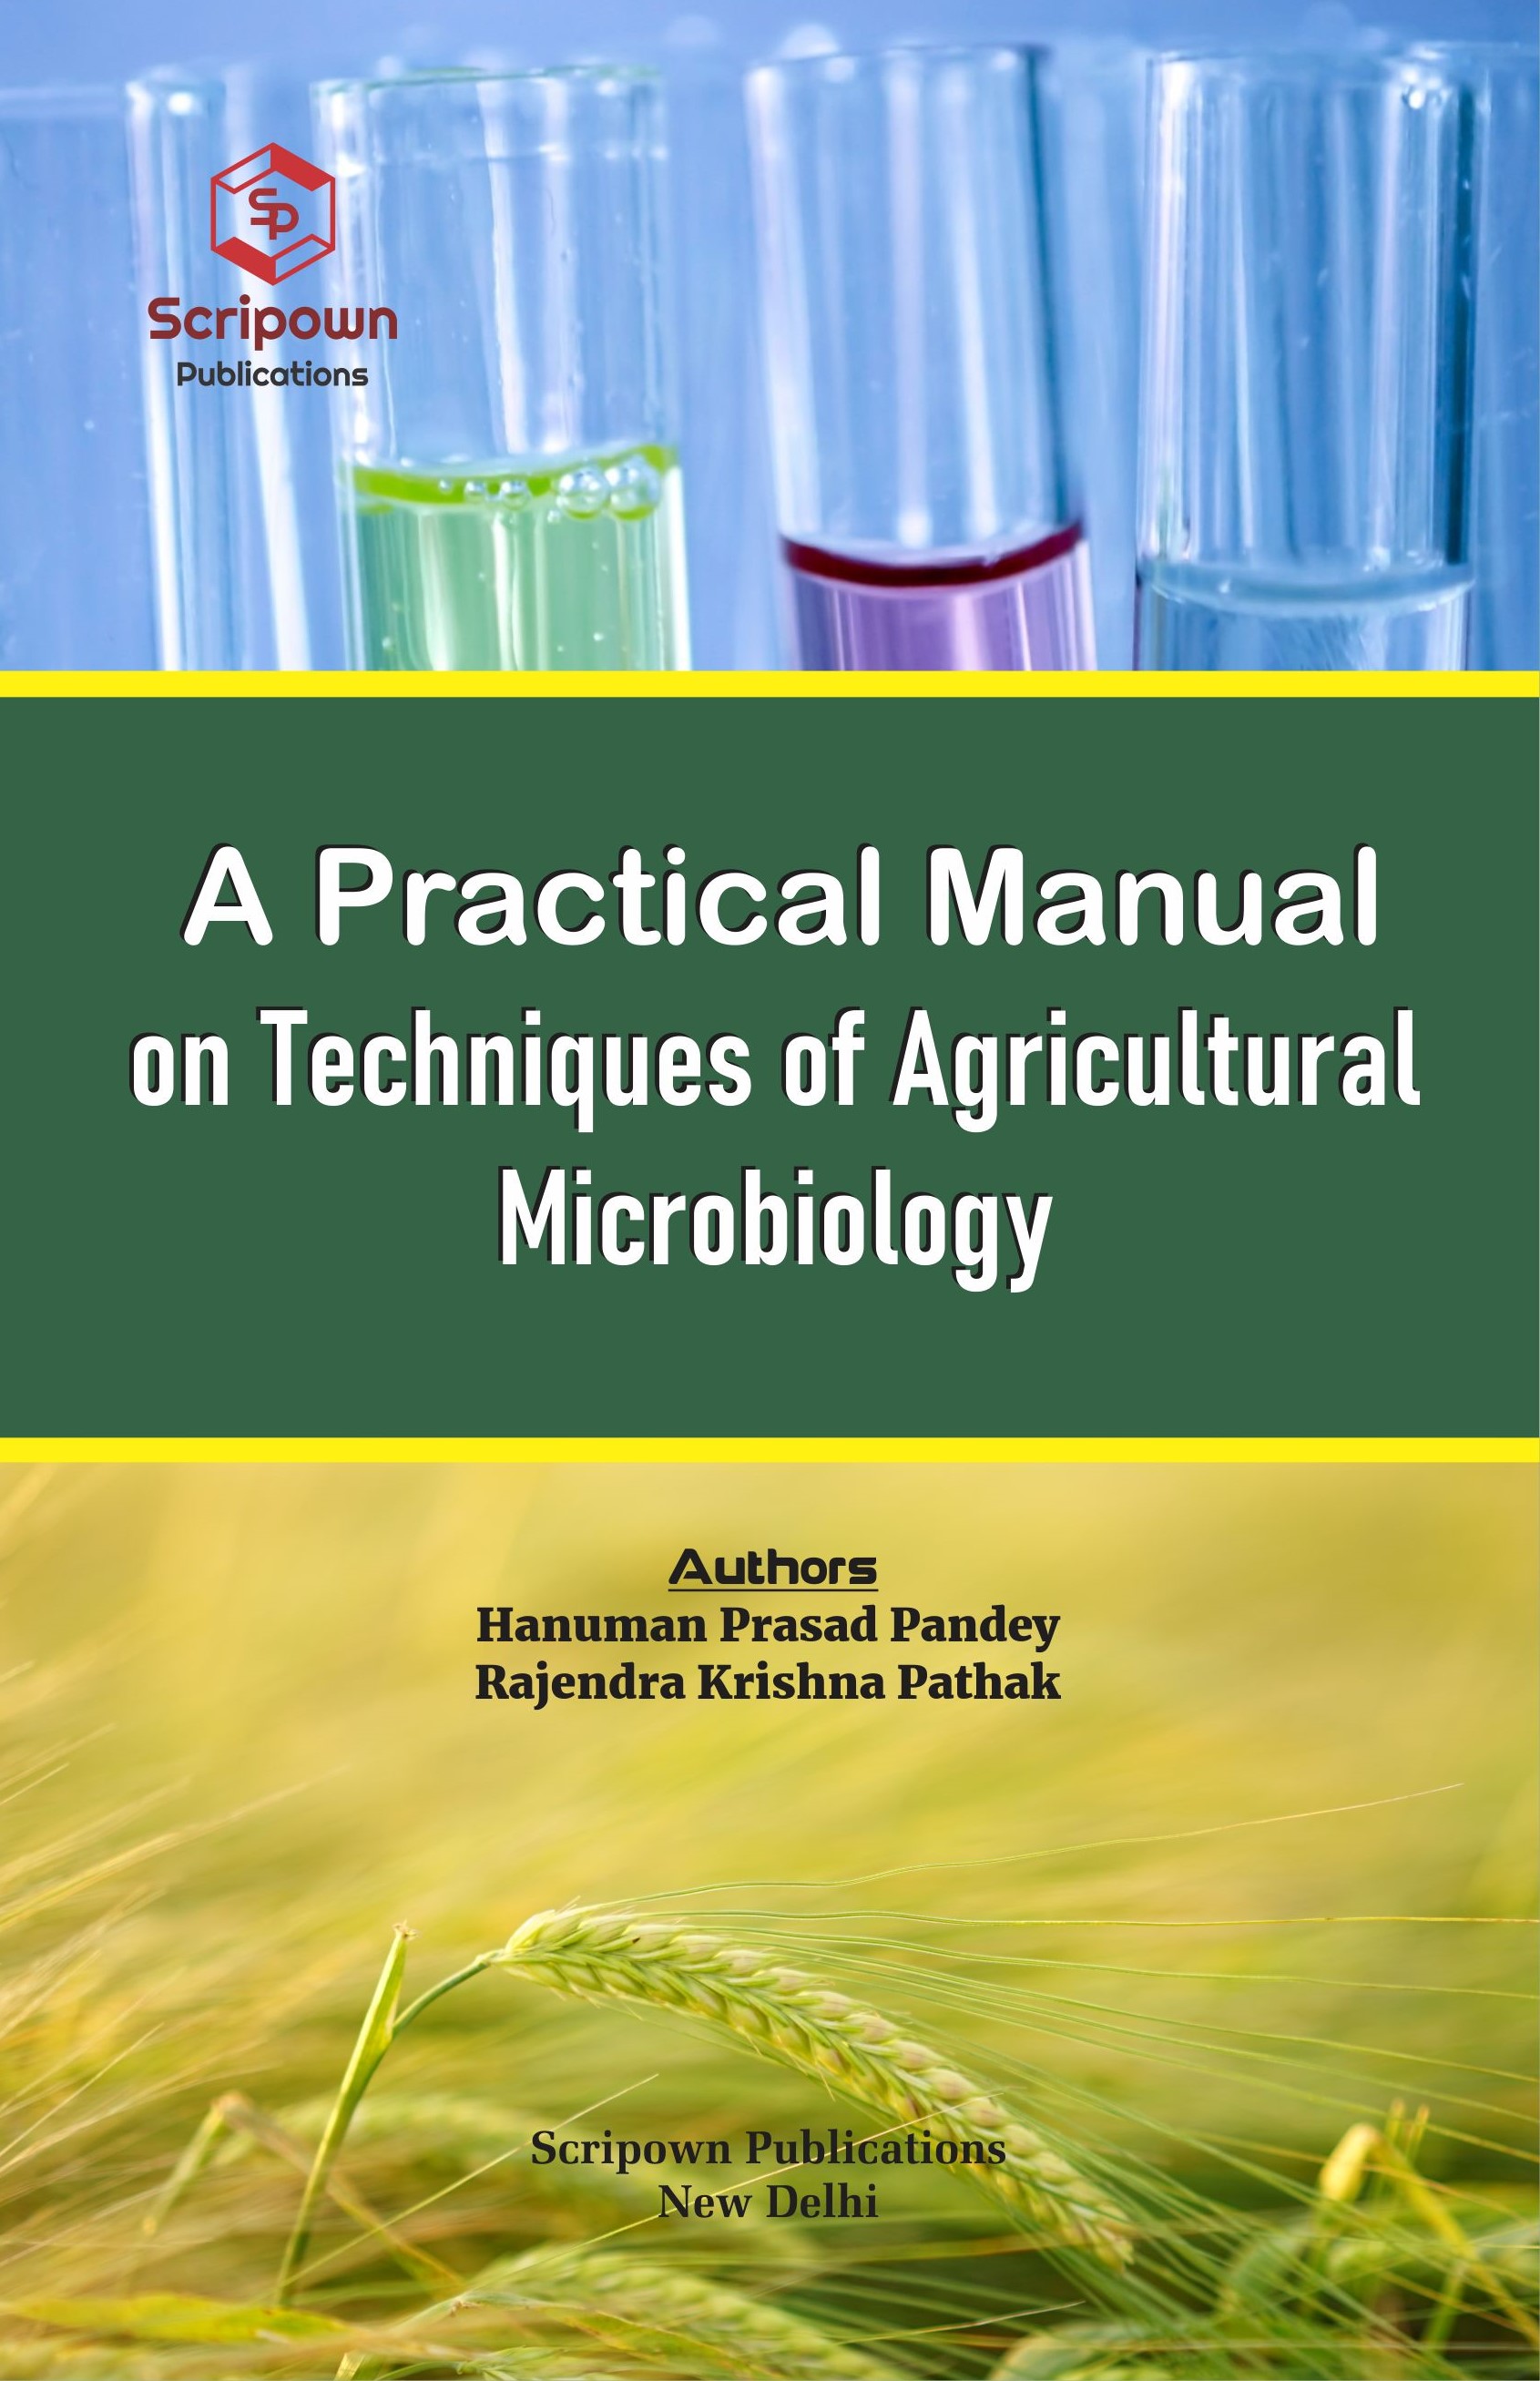 A Practical Manual on Techniques of Agricultural Microbiology